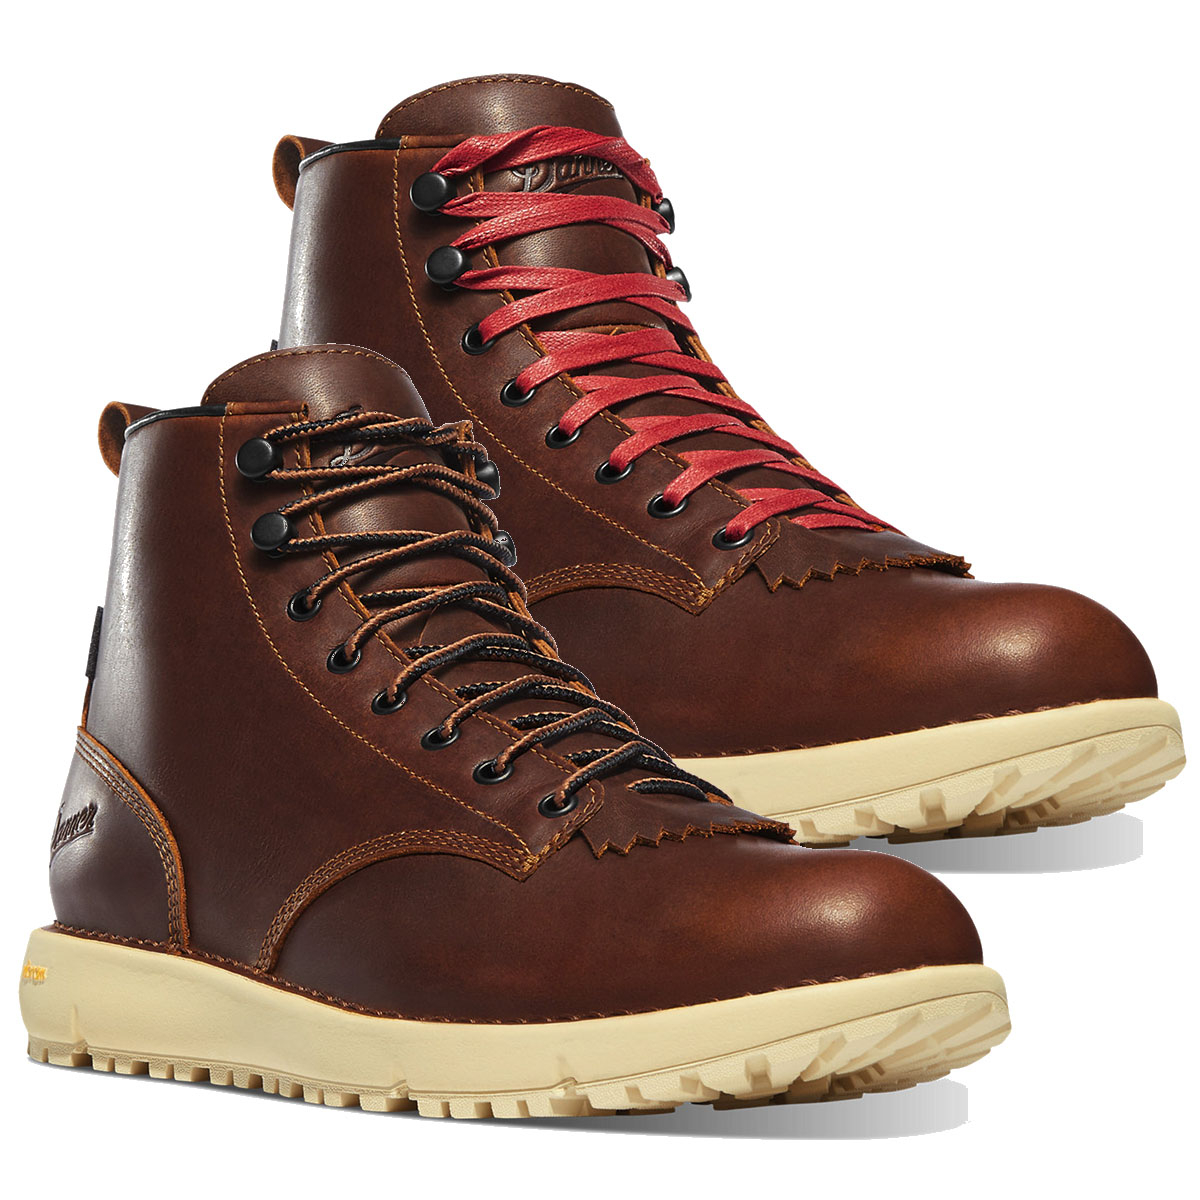 Danner Logger 917 GTX Monk's Robe, Two pairs of laces included. Because you can never have enough lacing options, this pair comes with an alternate pair.